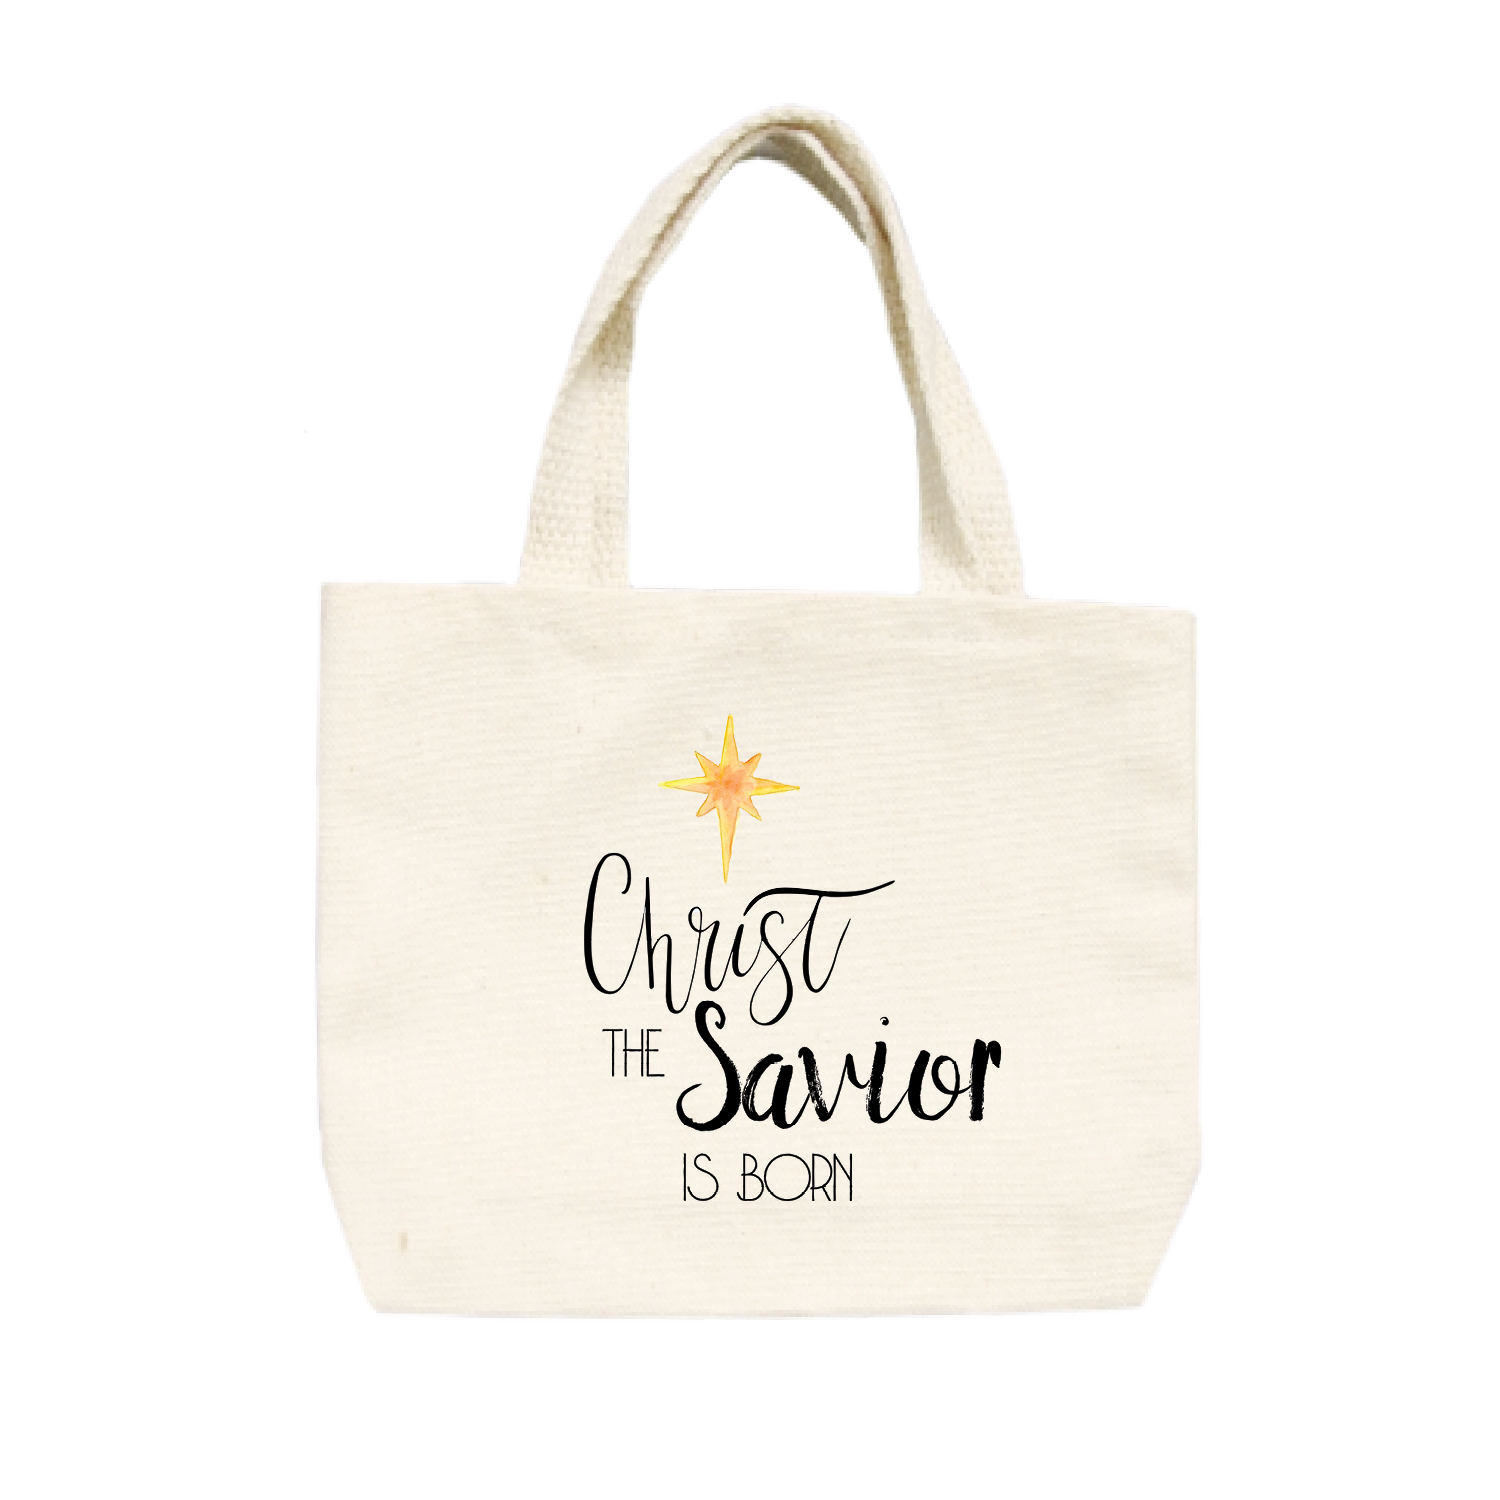 Christ is born small tote